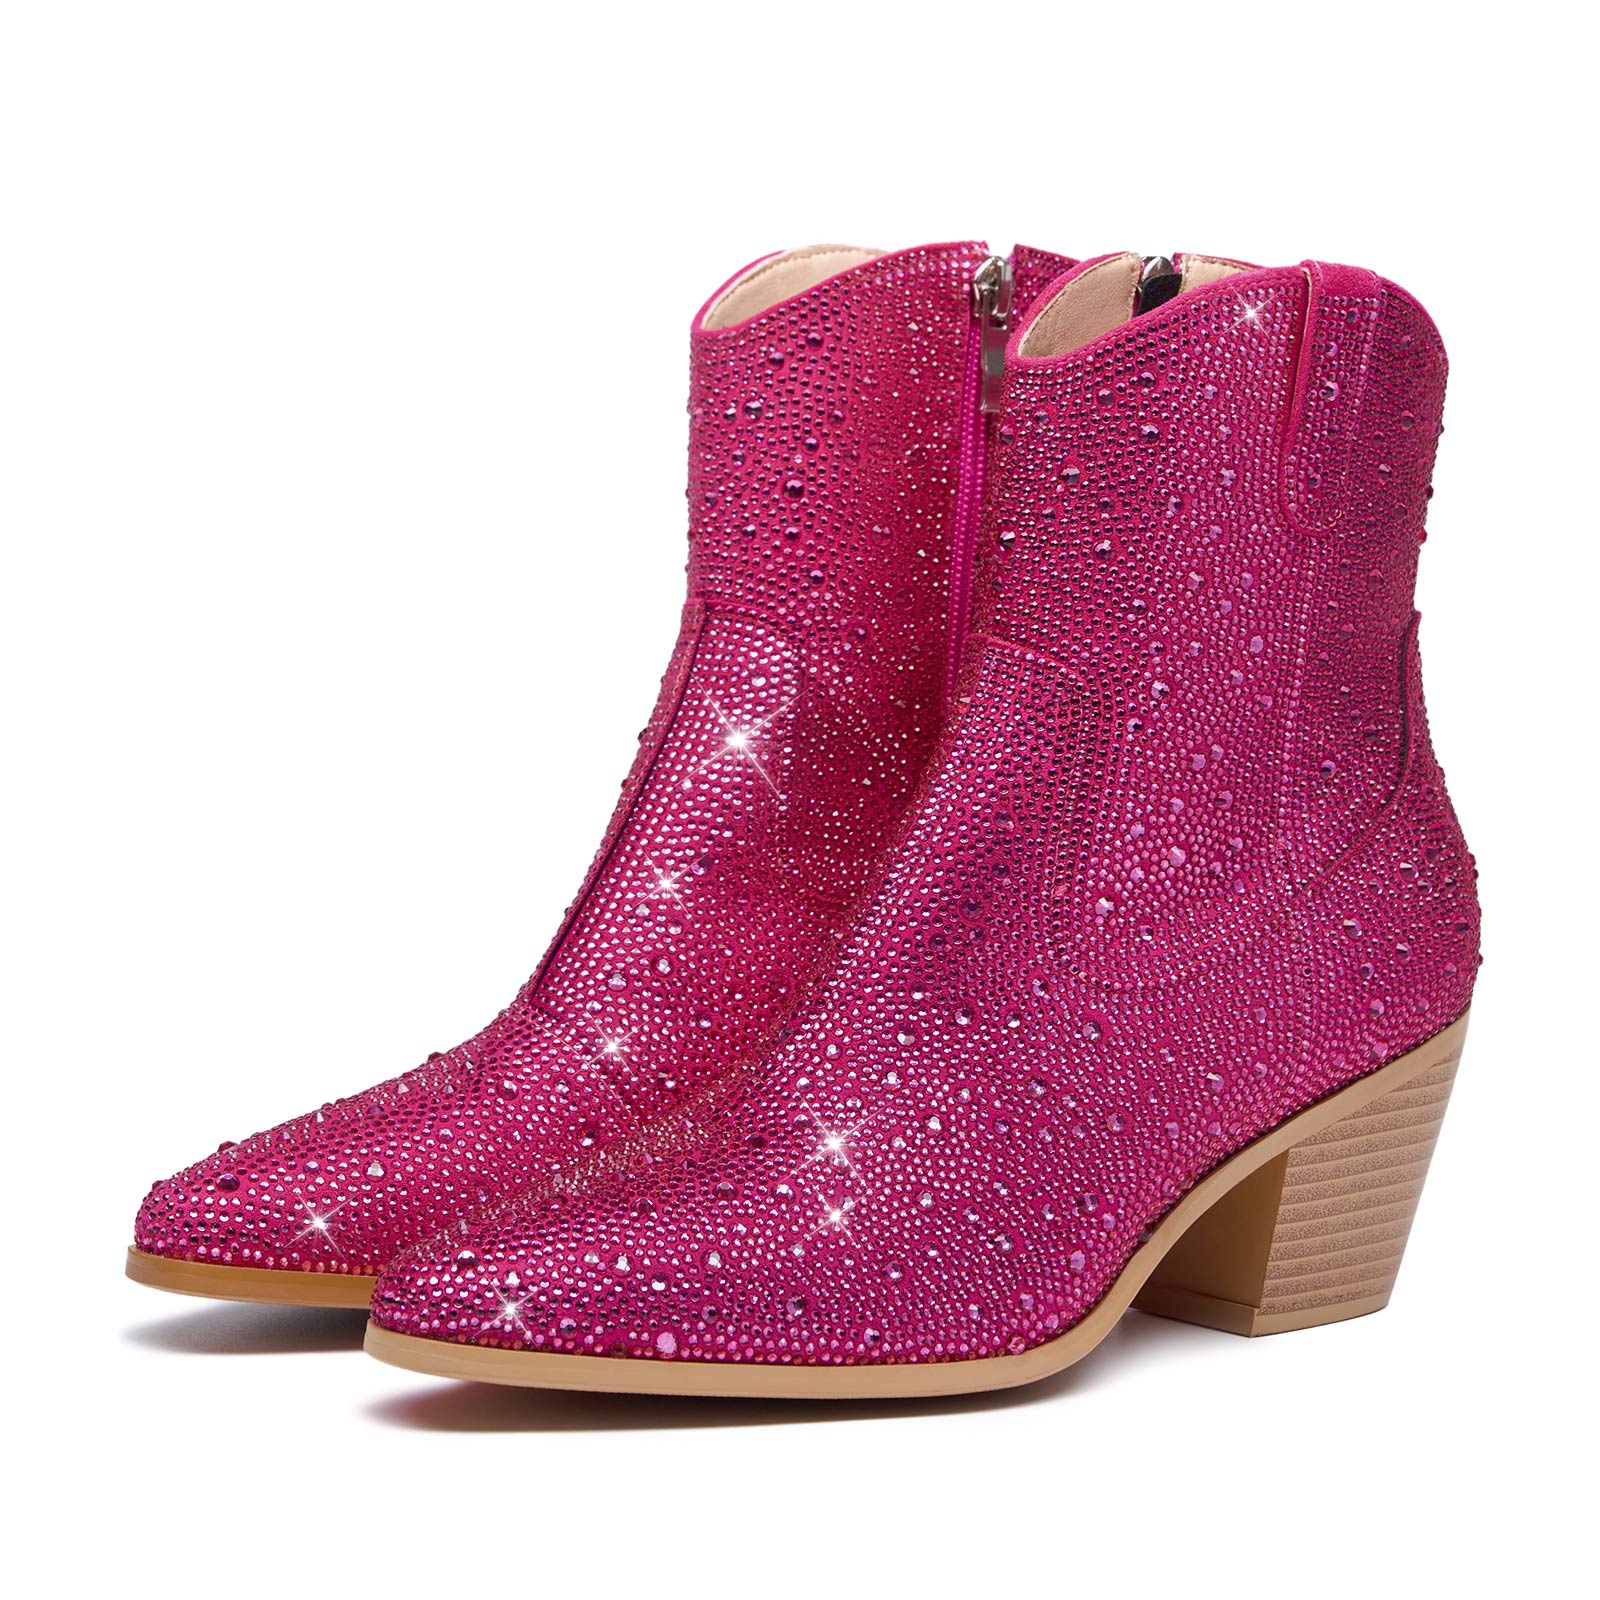 Rhinestone Cowboy Boots Sparkly Ankle Cowgirl Booties